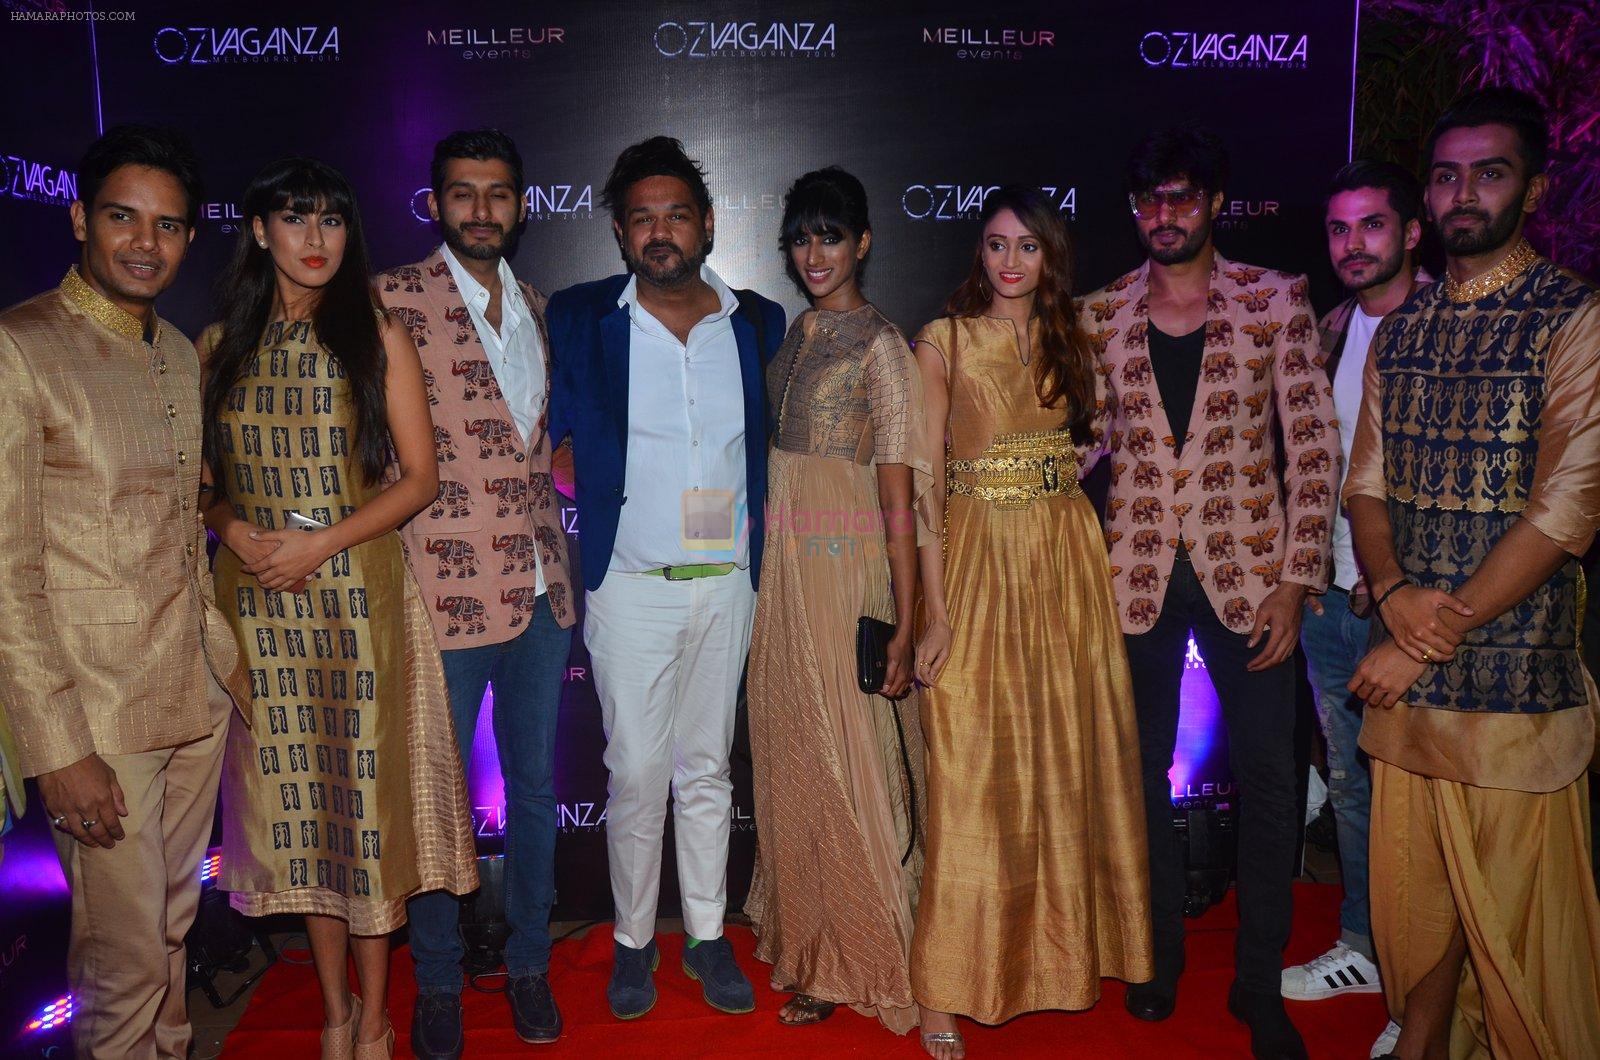 at Oz fashion event in Mumbai on 23rd Aug 2016